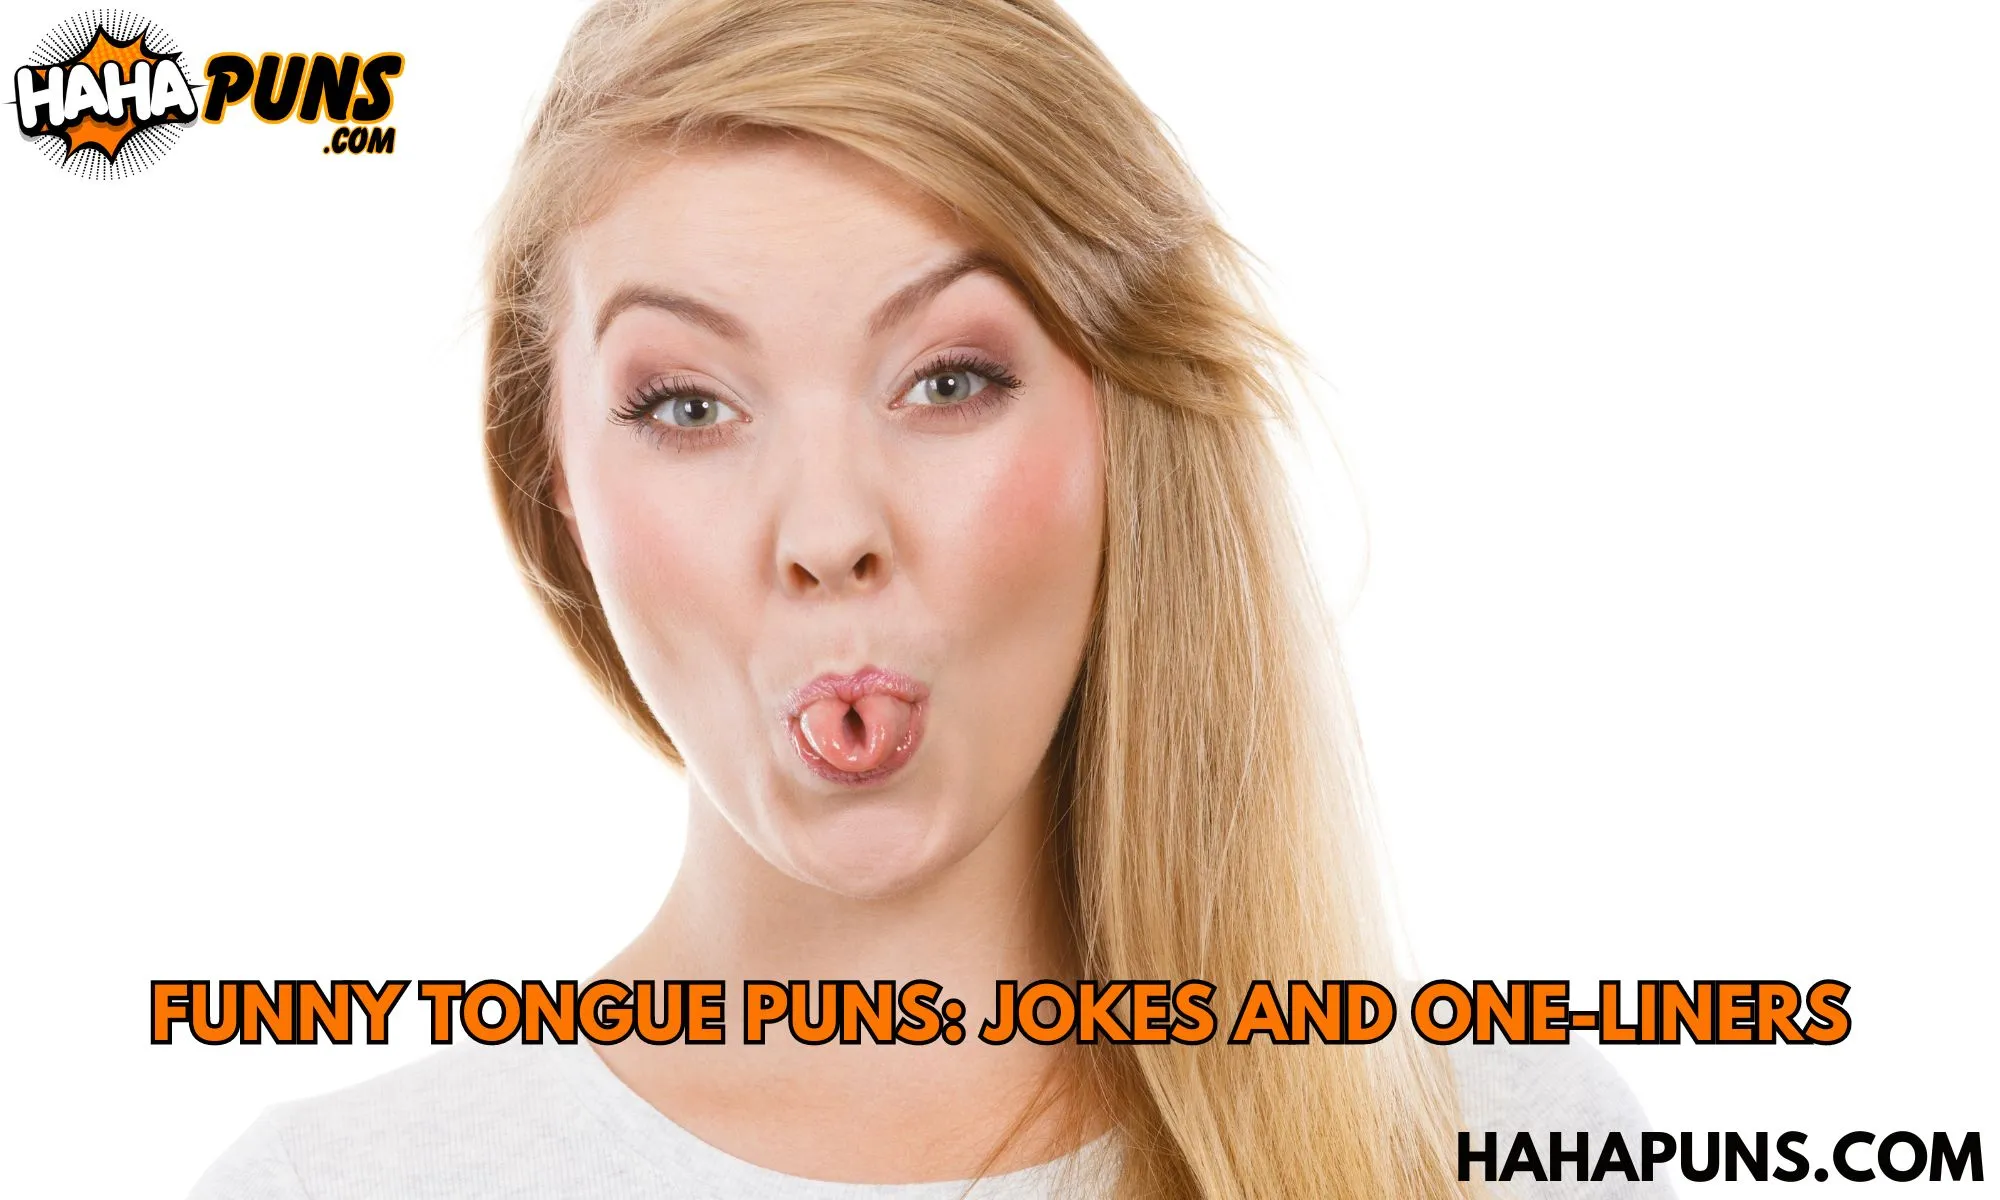 Funny Tongue Puns: Jokes And One-Liners